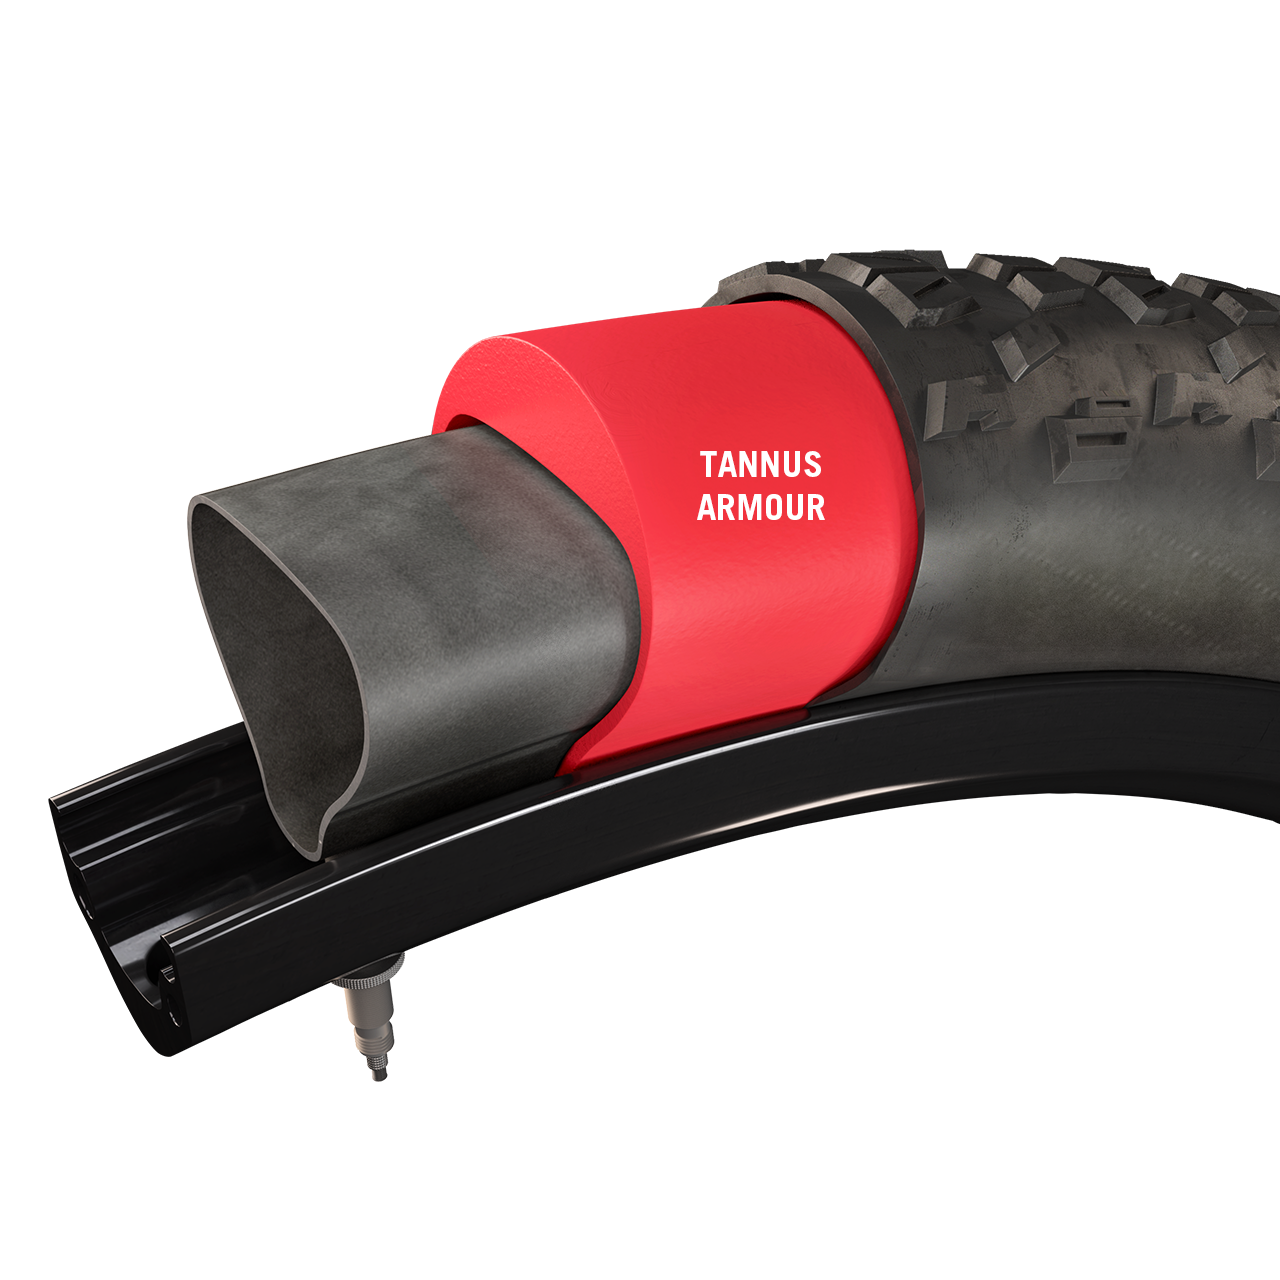 Tannus Armour Tire Insert Sold Individually